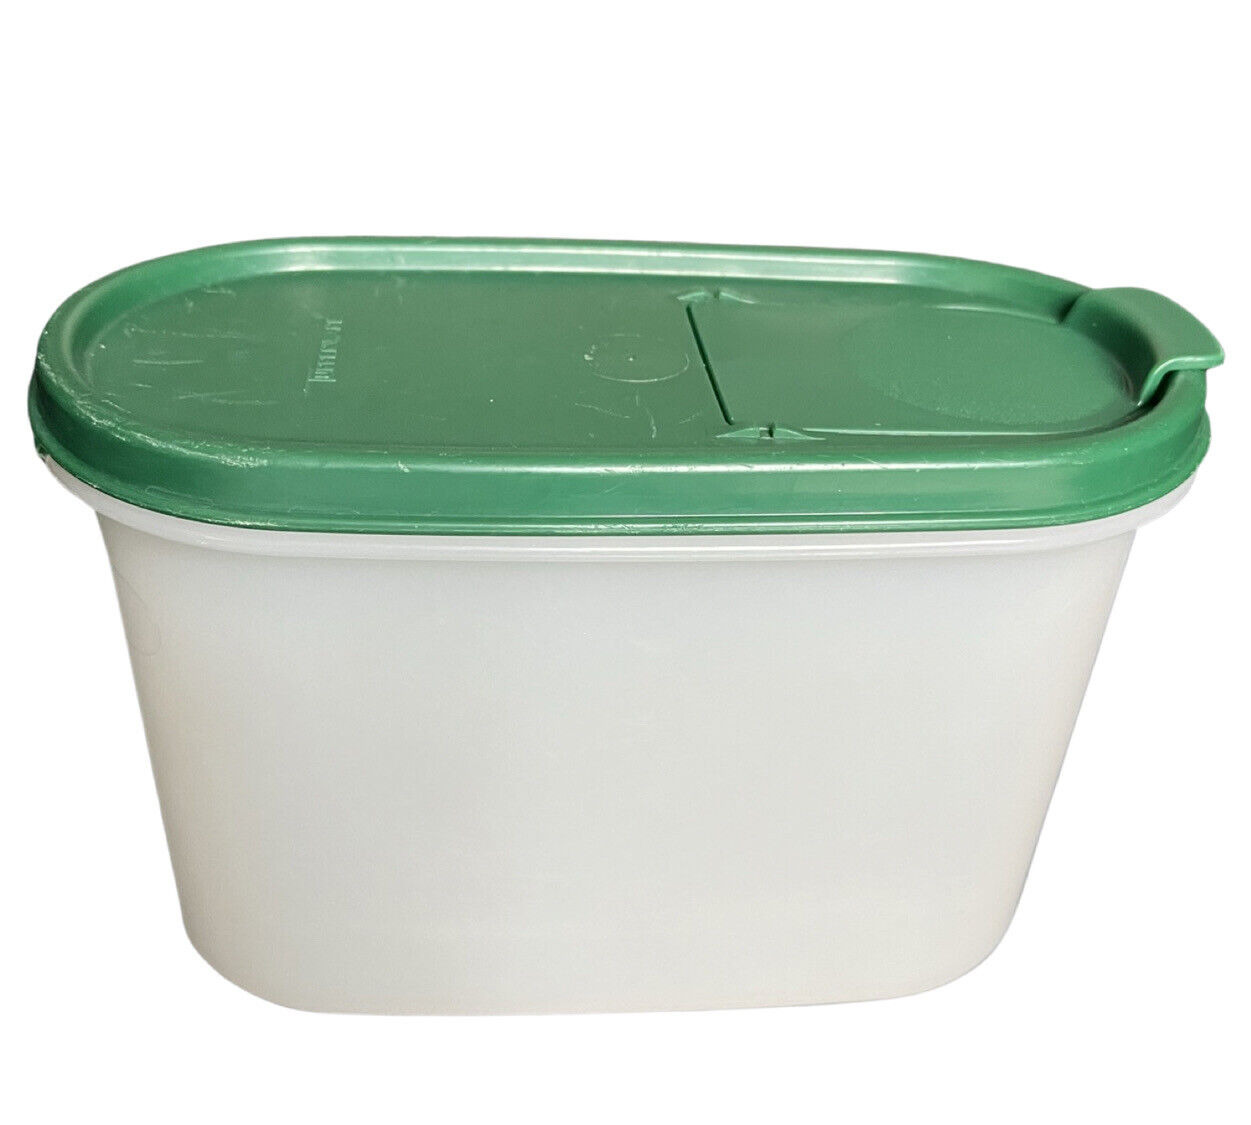 Tupperware 1612-14 Oval Modular Container 4 3/4 Cups Capacity Green LID Vintage